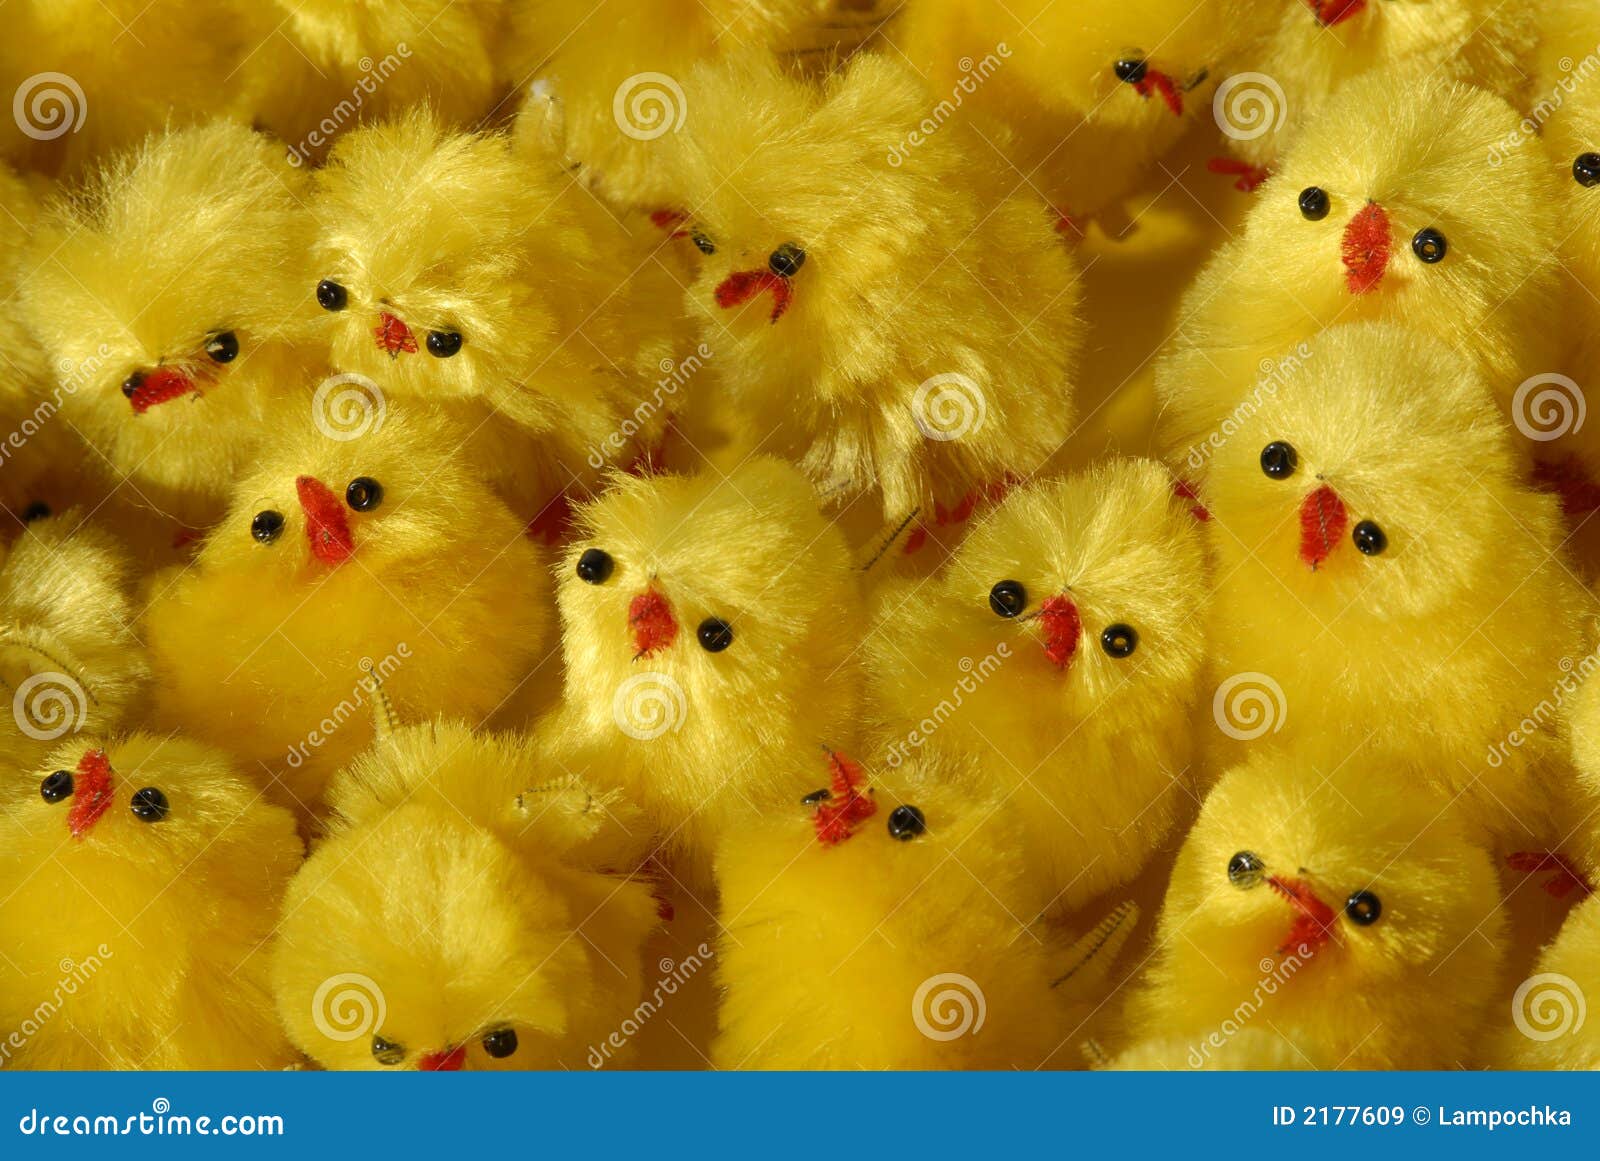 Too Much Chicks Stock Image Image Of Easter Nest Life 2177609